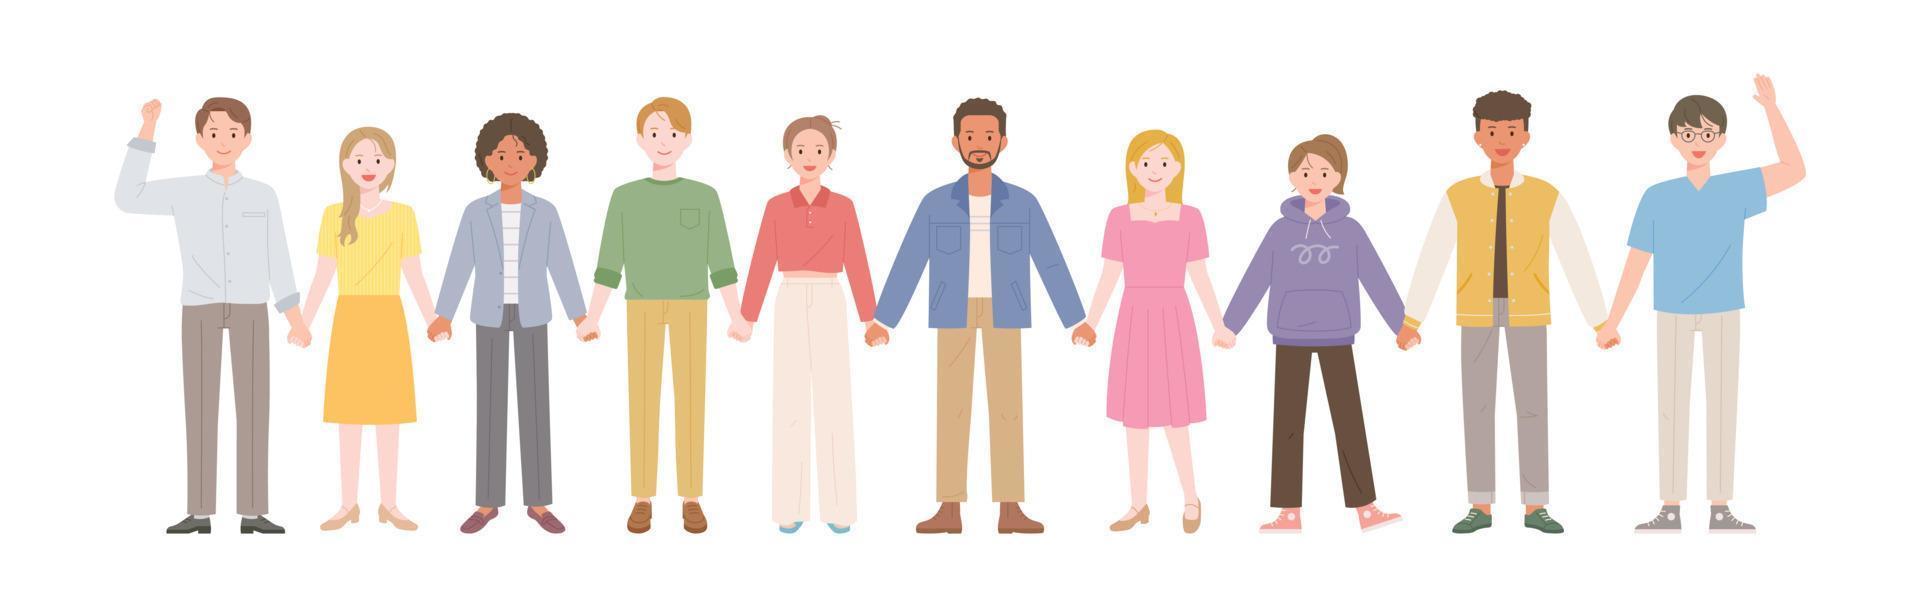 People of different races are standing holding each other's hands. vector